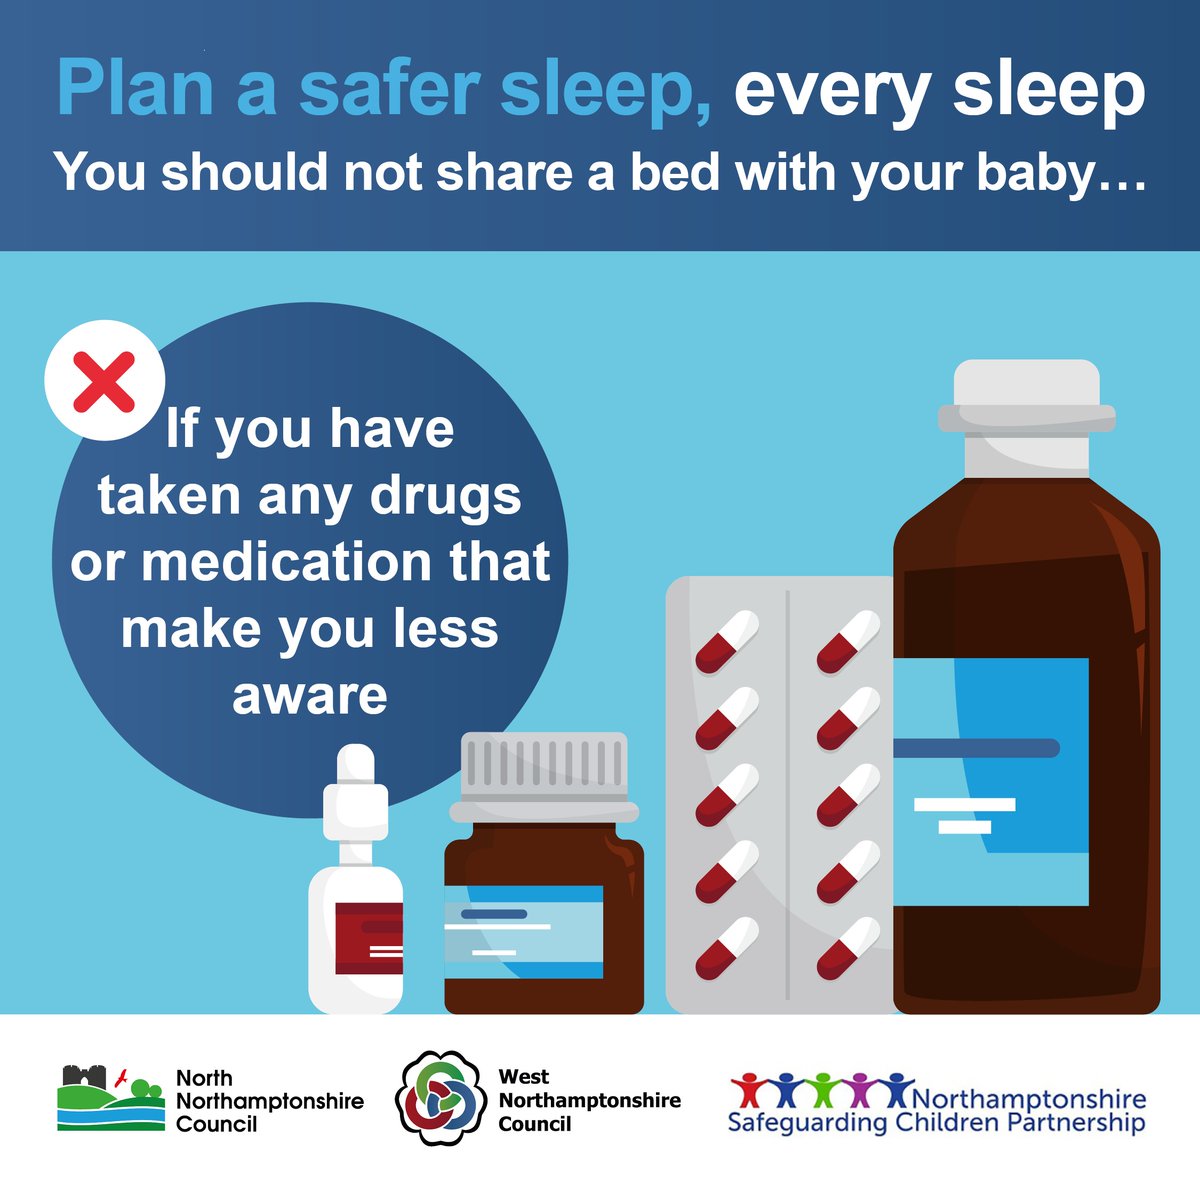 Whether prescribed or recreational, drugs can make you sleepy or less aware. It is always best to put baby in their own clear, flat separate sleep space, such as a cot or Moses basket in the same room as you. Visit The Lullaby Trust for advice bit.ly/3uMzXkE